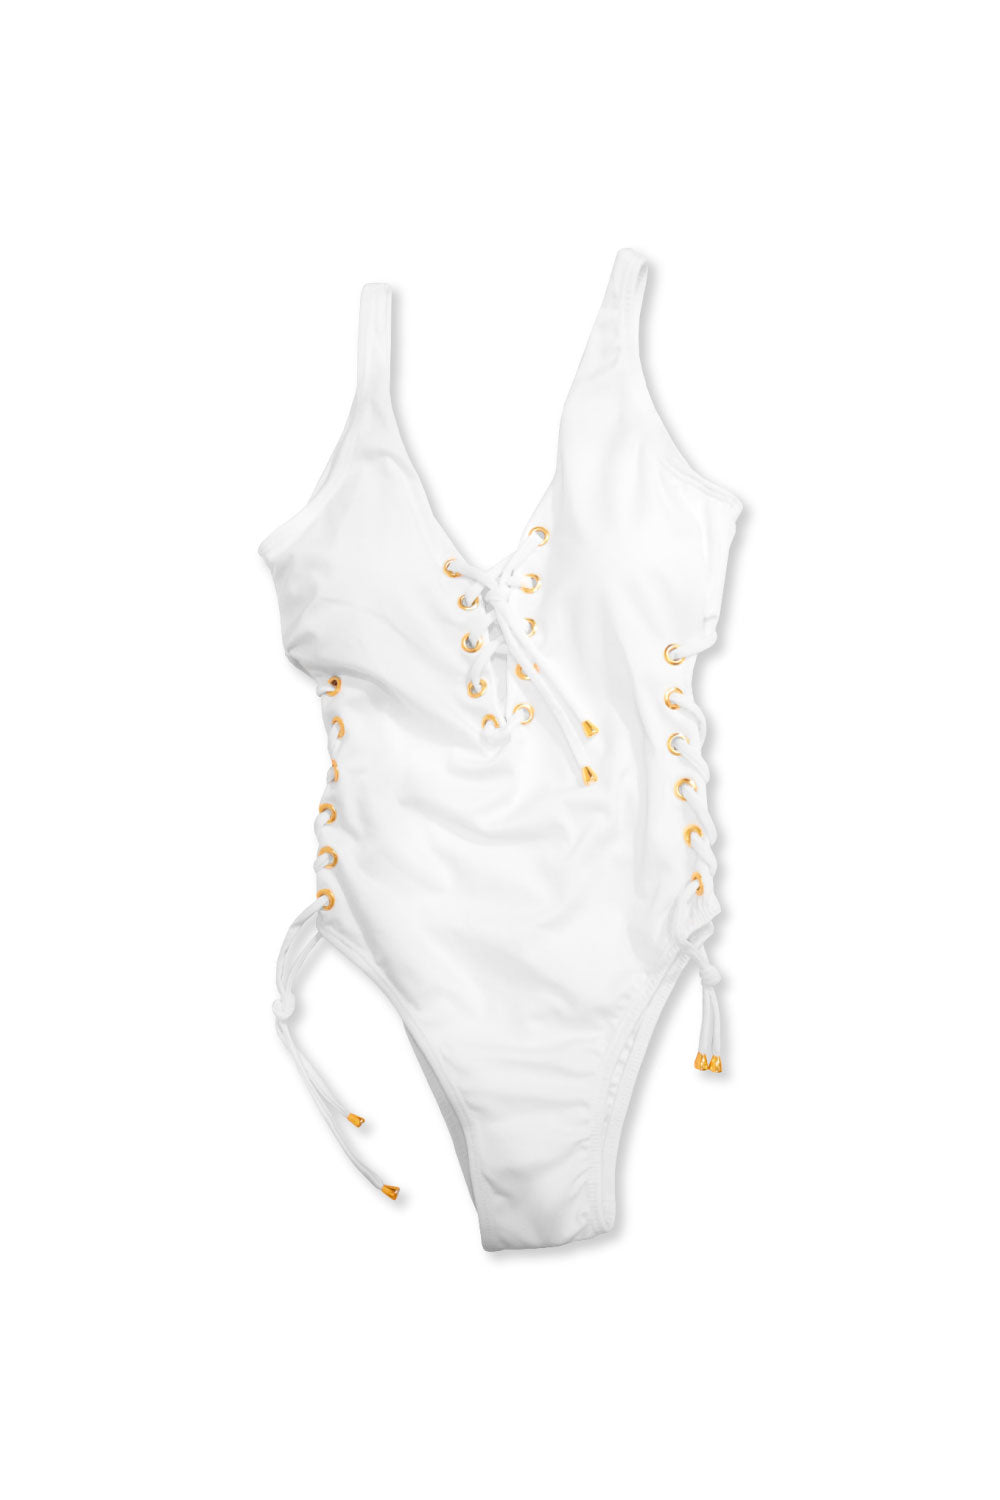 Image of the front of Lateen's Open-Sided One Piece Swimsuit in White.